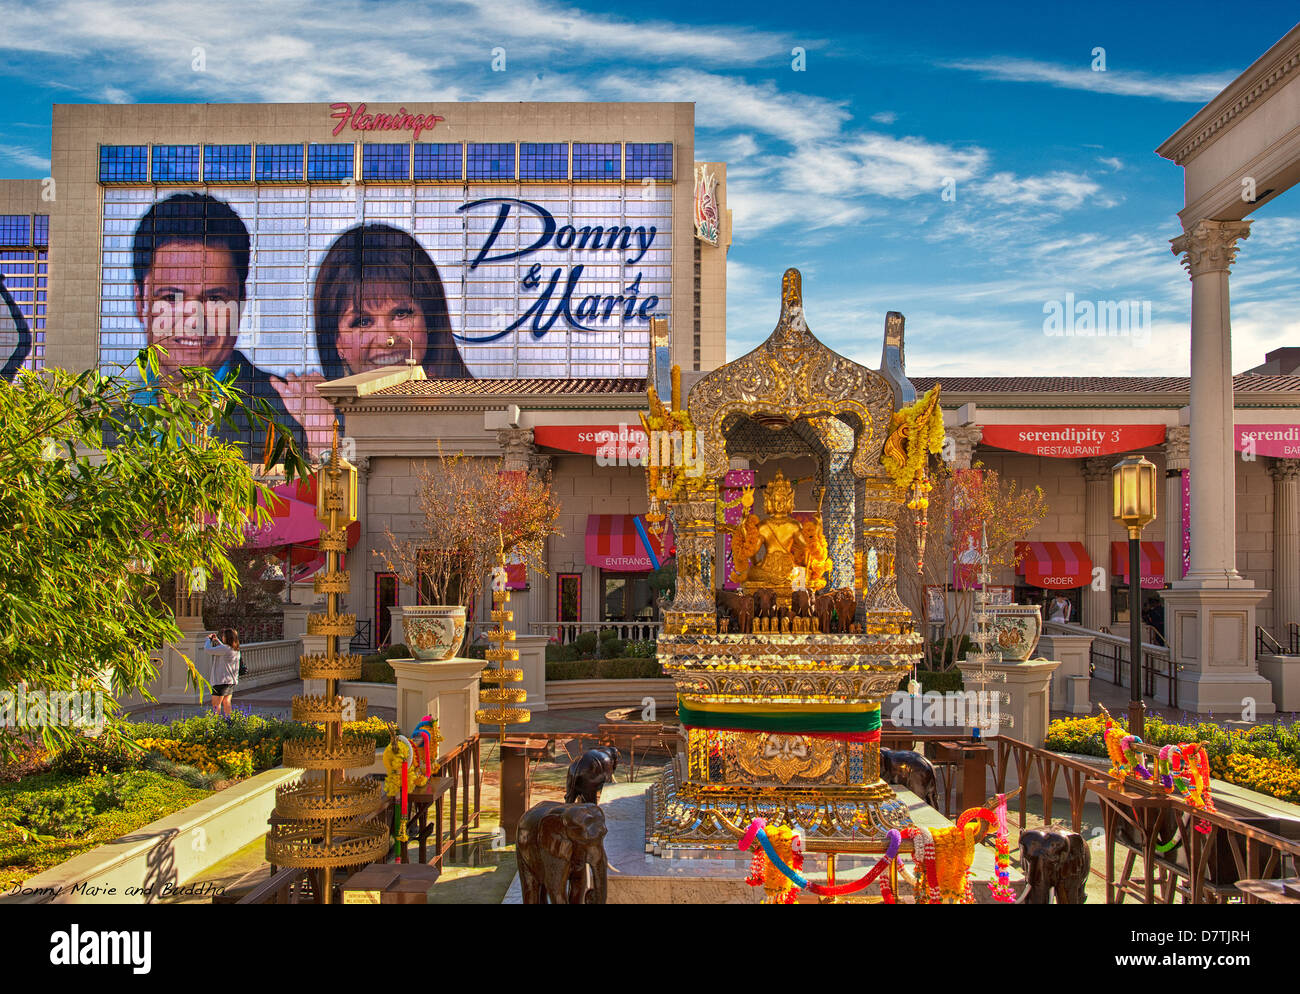 Donny Marie And Buddha,a satirical view of Las Vegas. Stock Photo